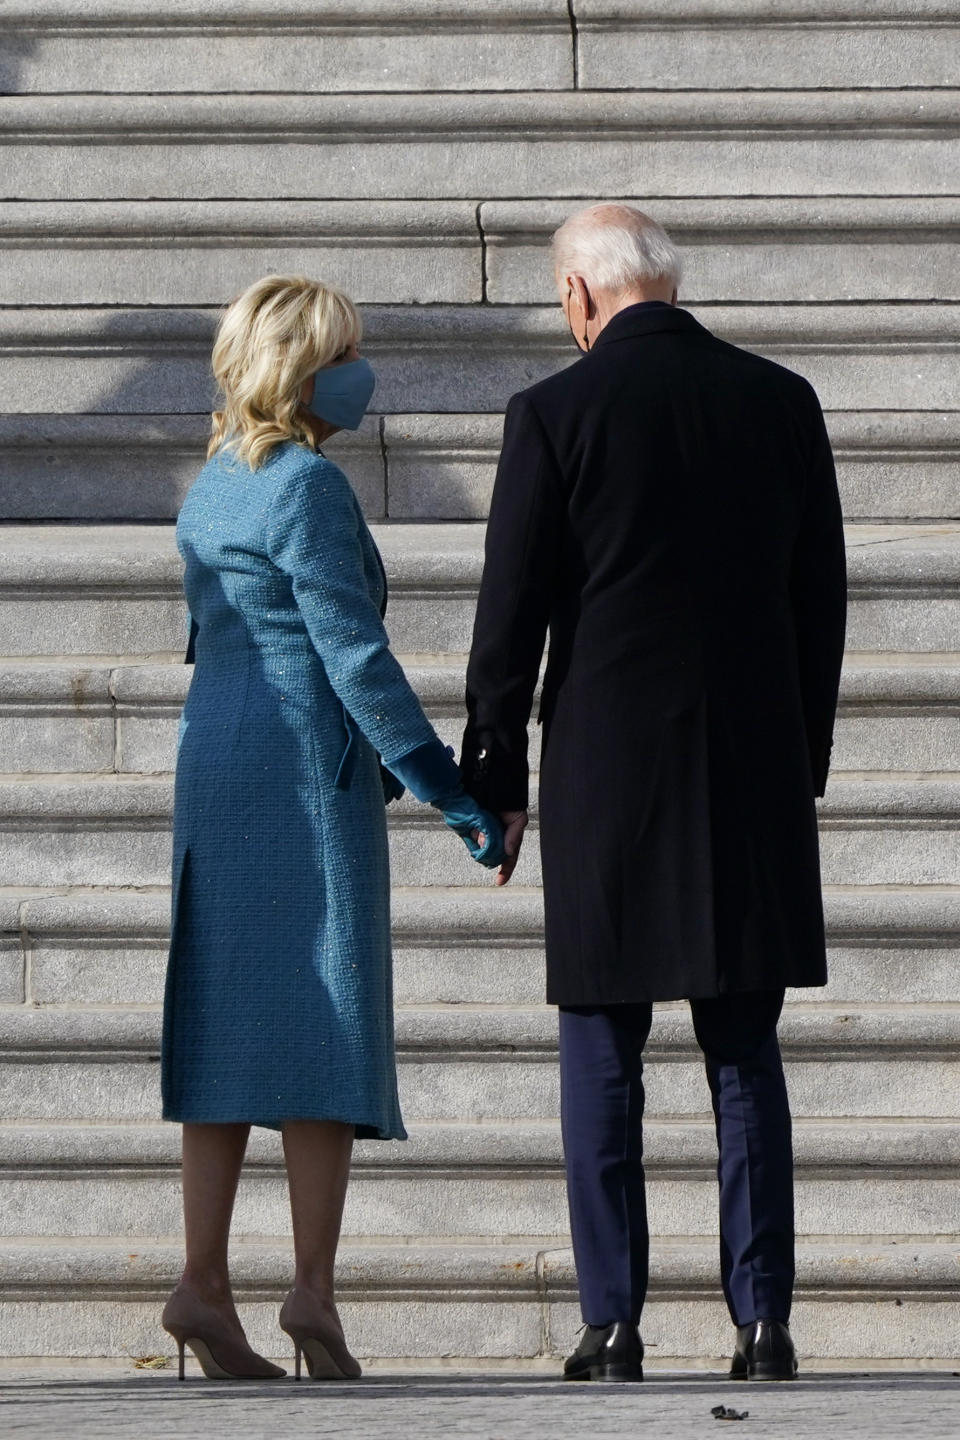 President-elect Joe Biden and his wife Jill Biden arrive at the steps of the U.S. Capitol for the start of the official inauguration ceremonies, in Washington, Wednesday, Jan. 20, 2021. (AP Photo/J. Scott Applewhite)